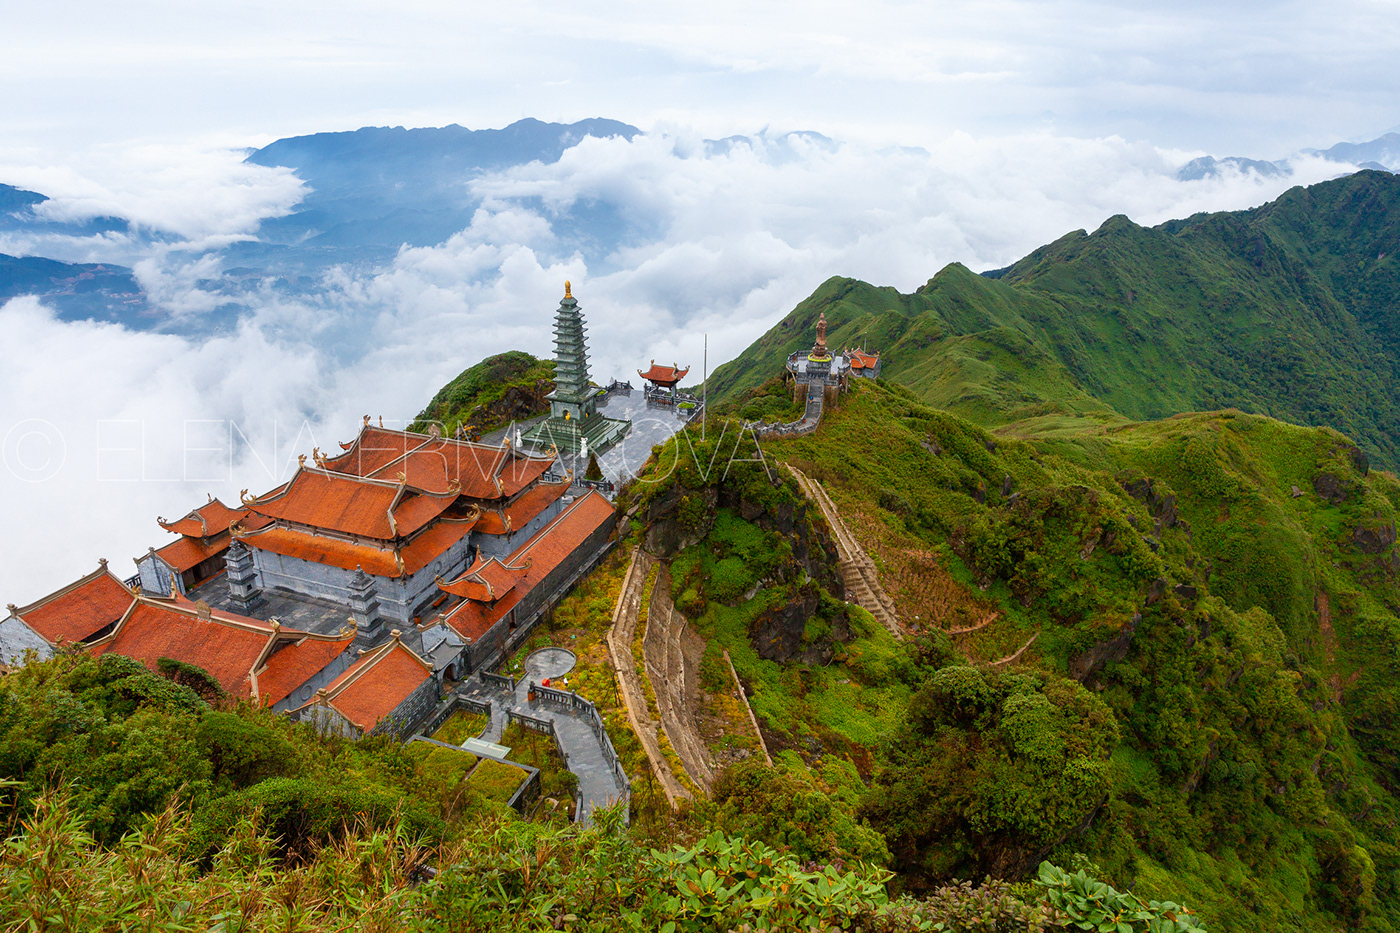 View of Buddhist the temple from the Fansipan peak, Sapa, Vietnam